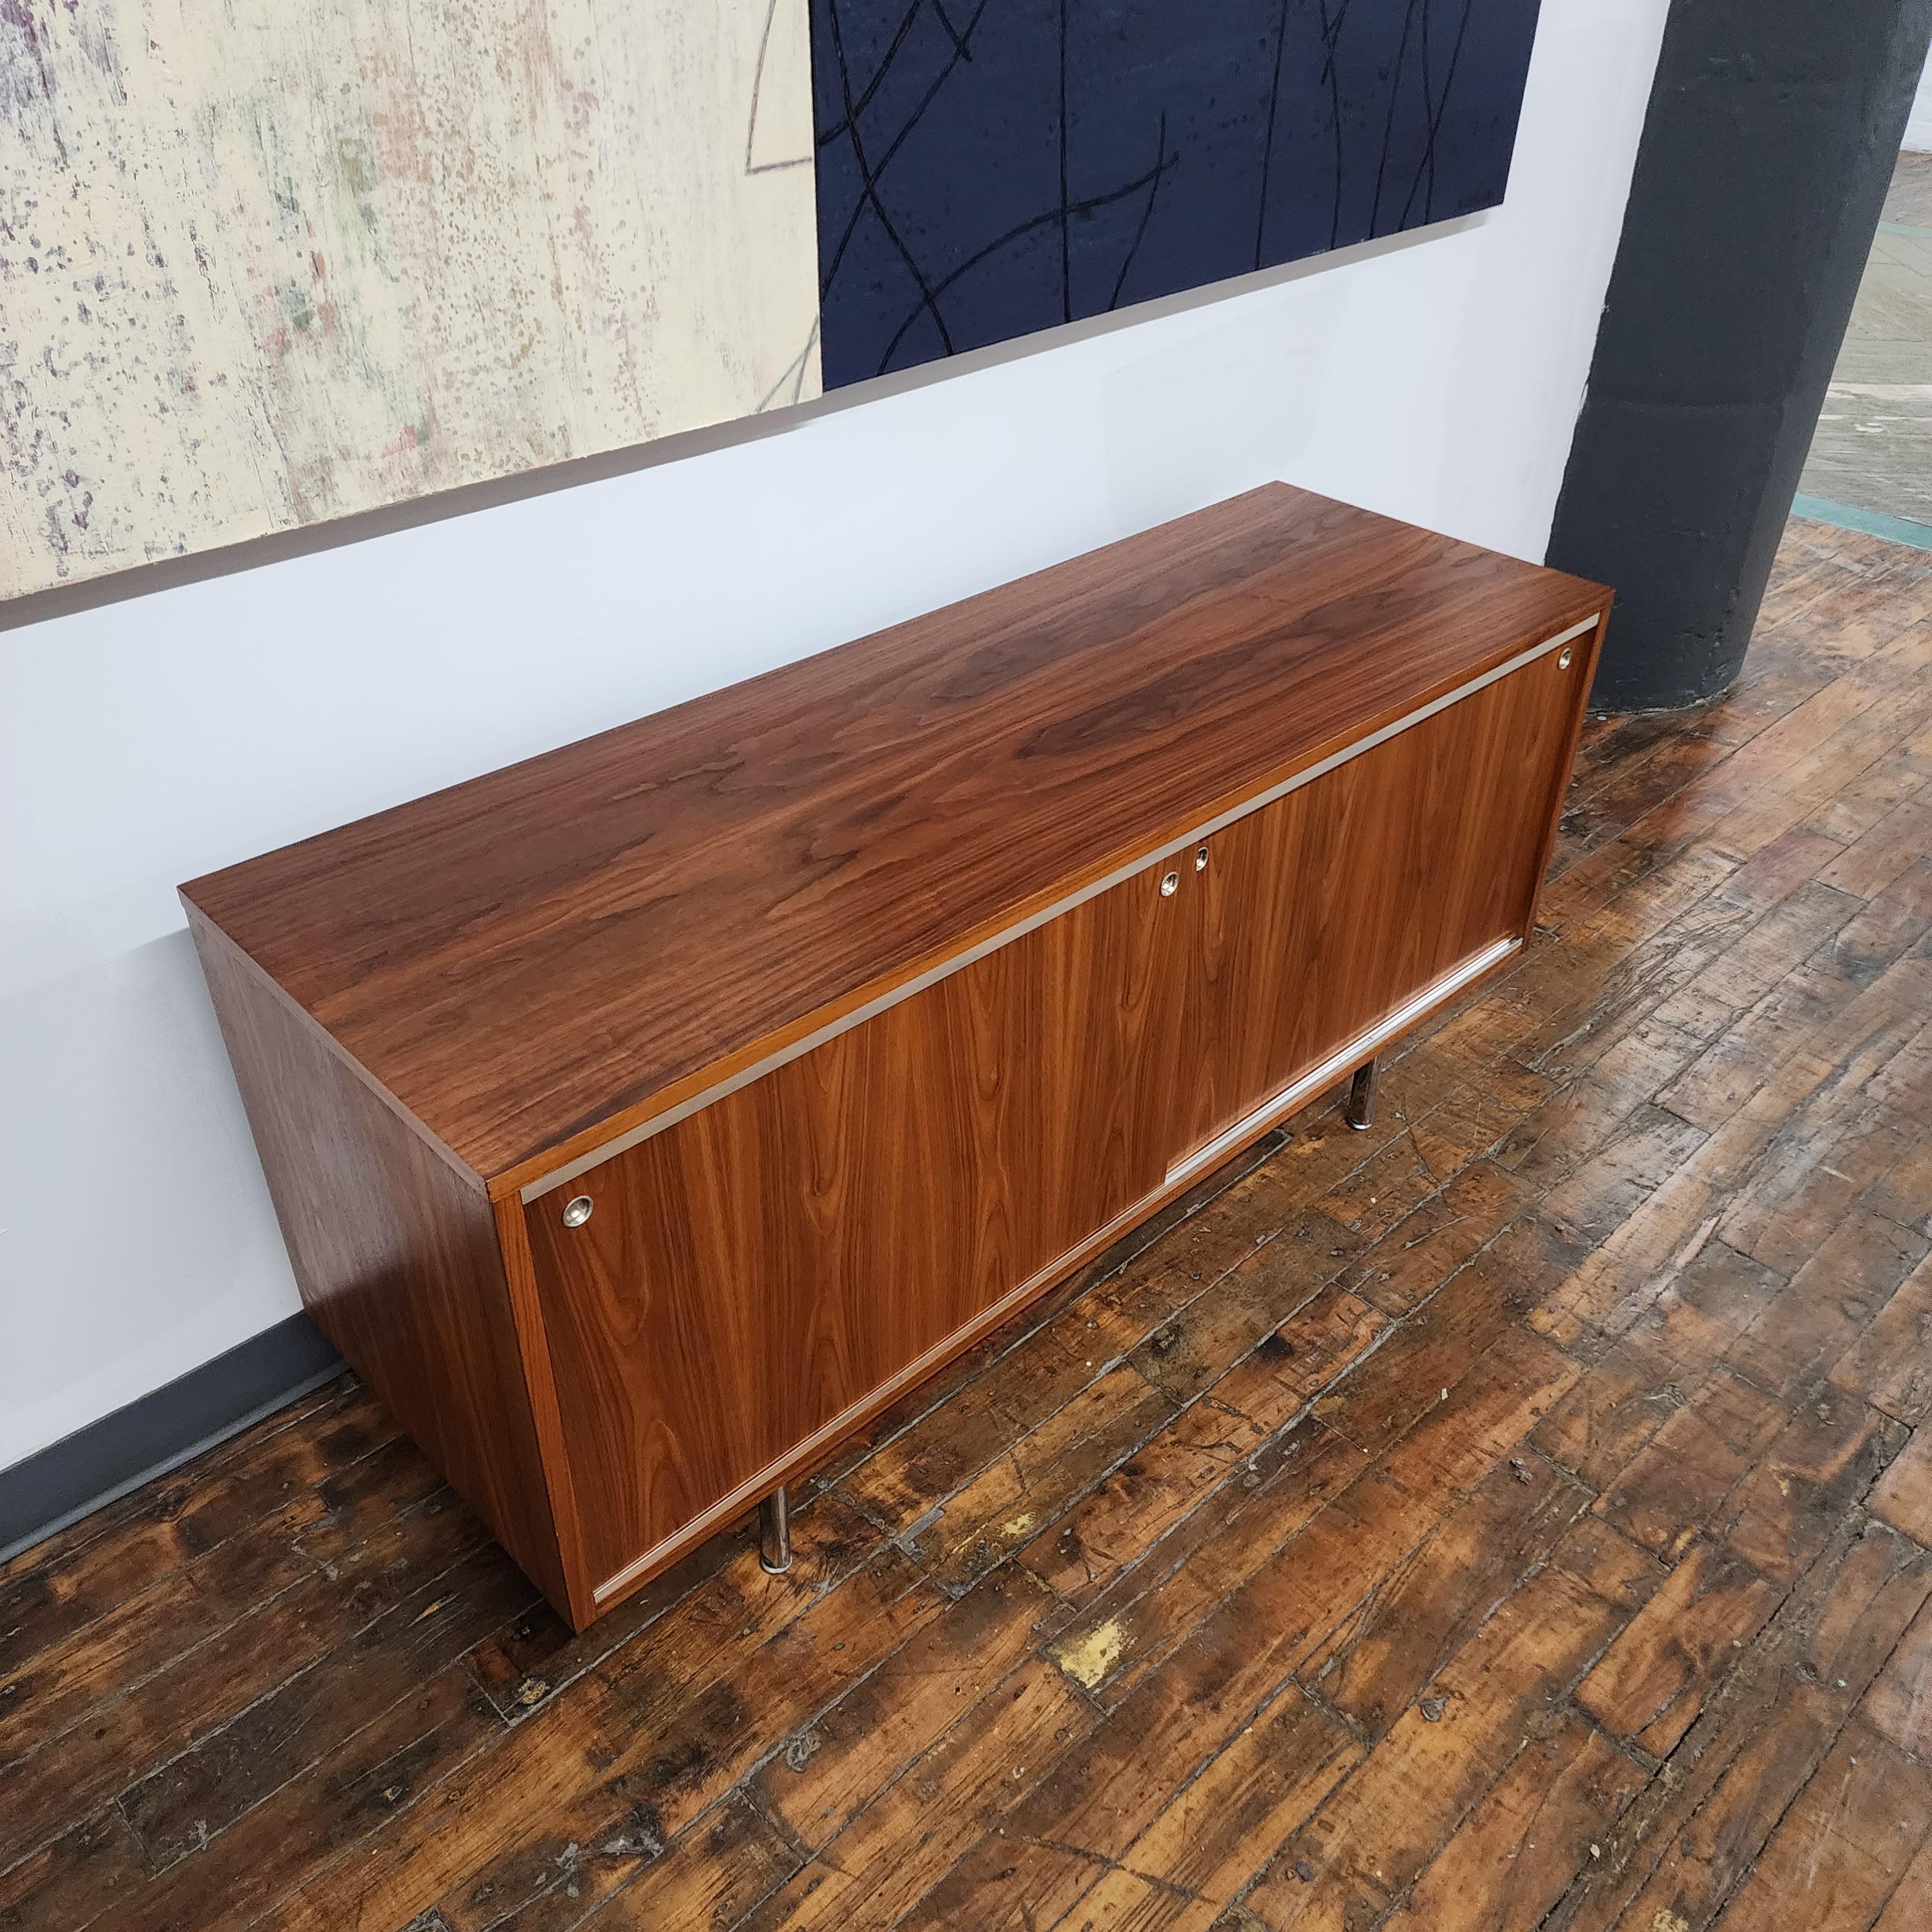 Beautiful Vintage George Nelson for Herman Miller Series 8000 Walnut Credenza. features chrome door glides with round chrome pulls and chrome legs. sliding walnut door with adjustable shelves inside. The back has been drilled for cable access.